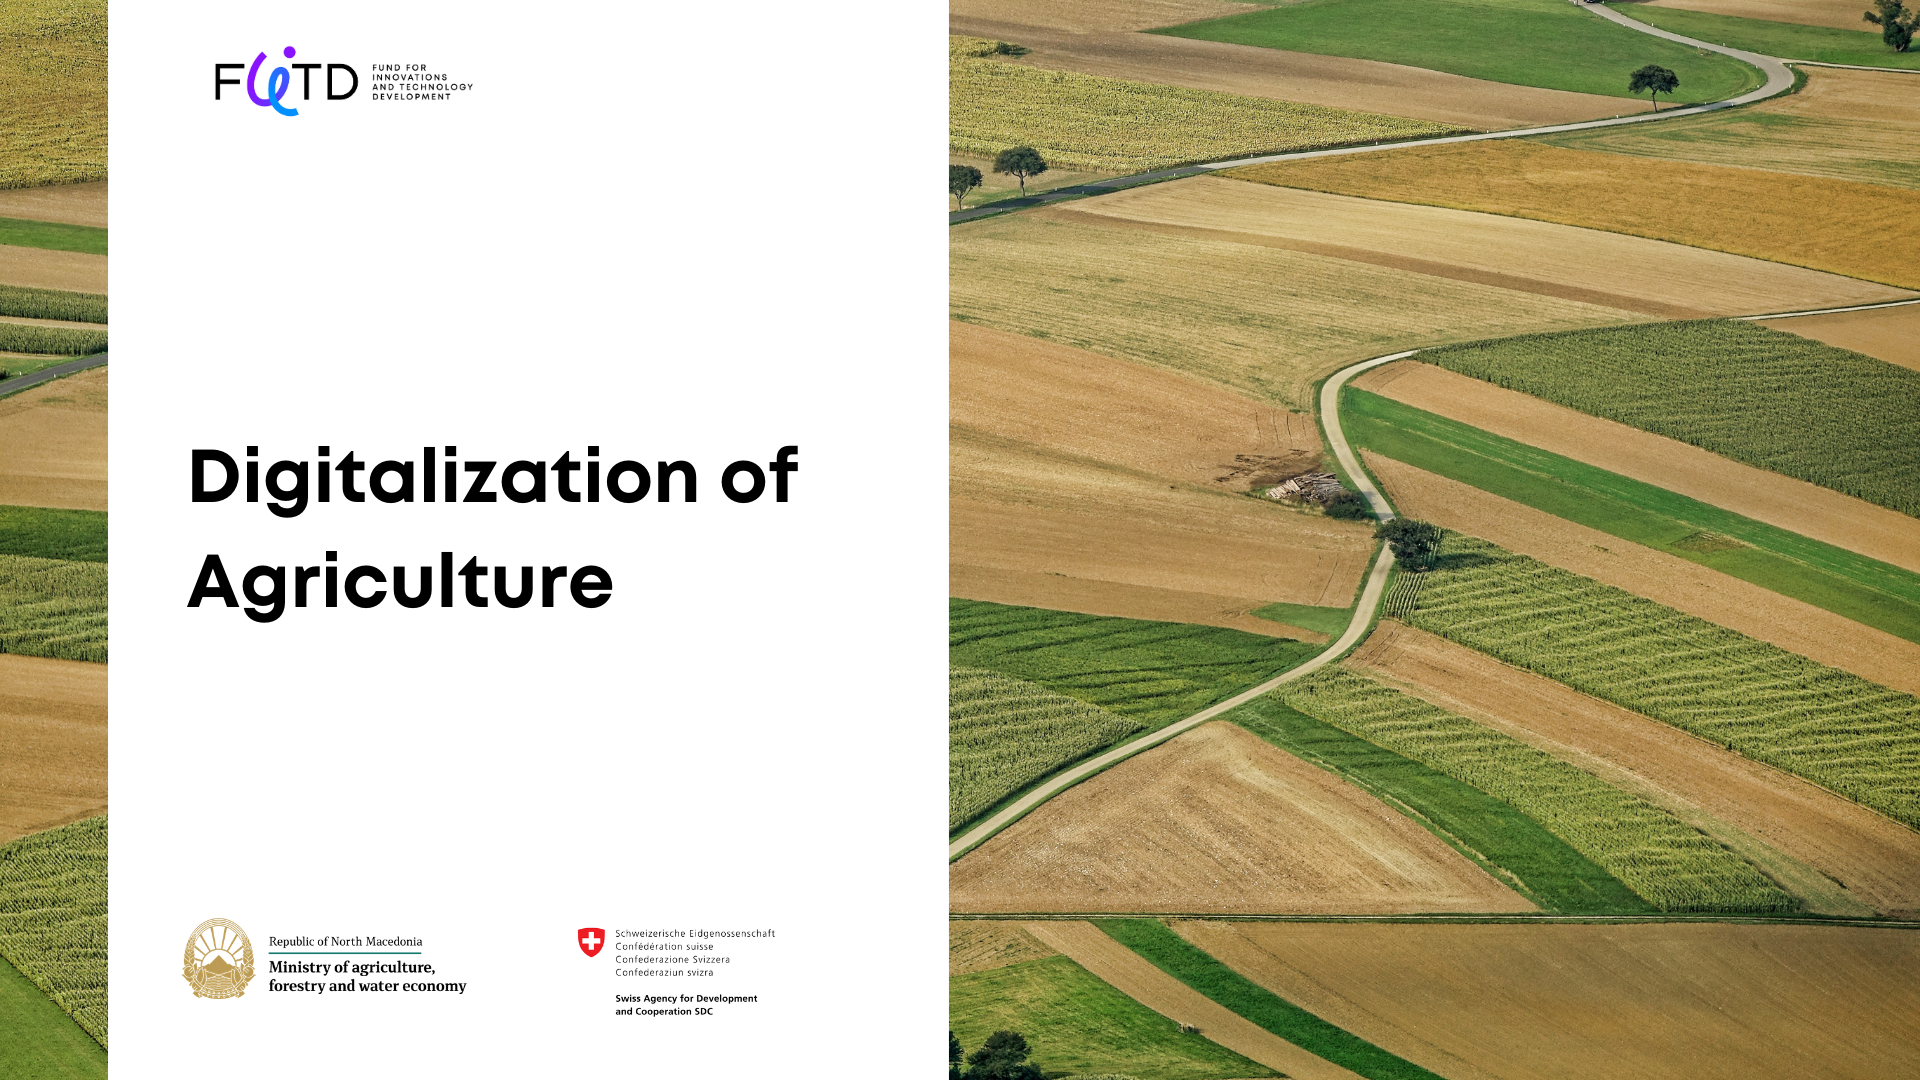 “Digitization of Agriculture”